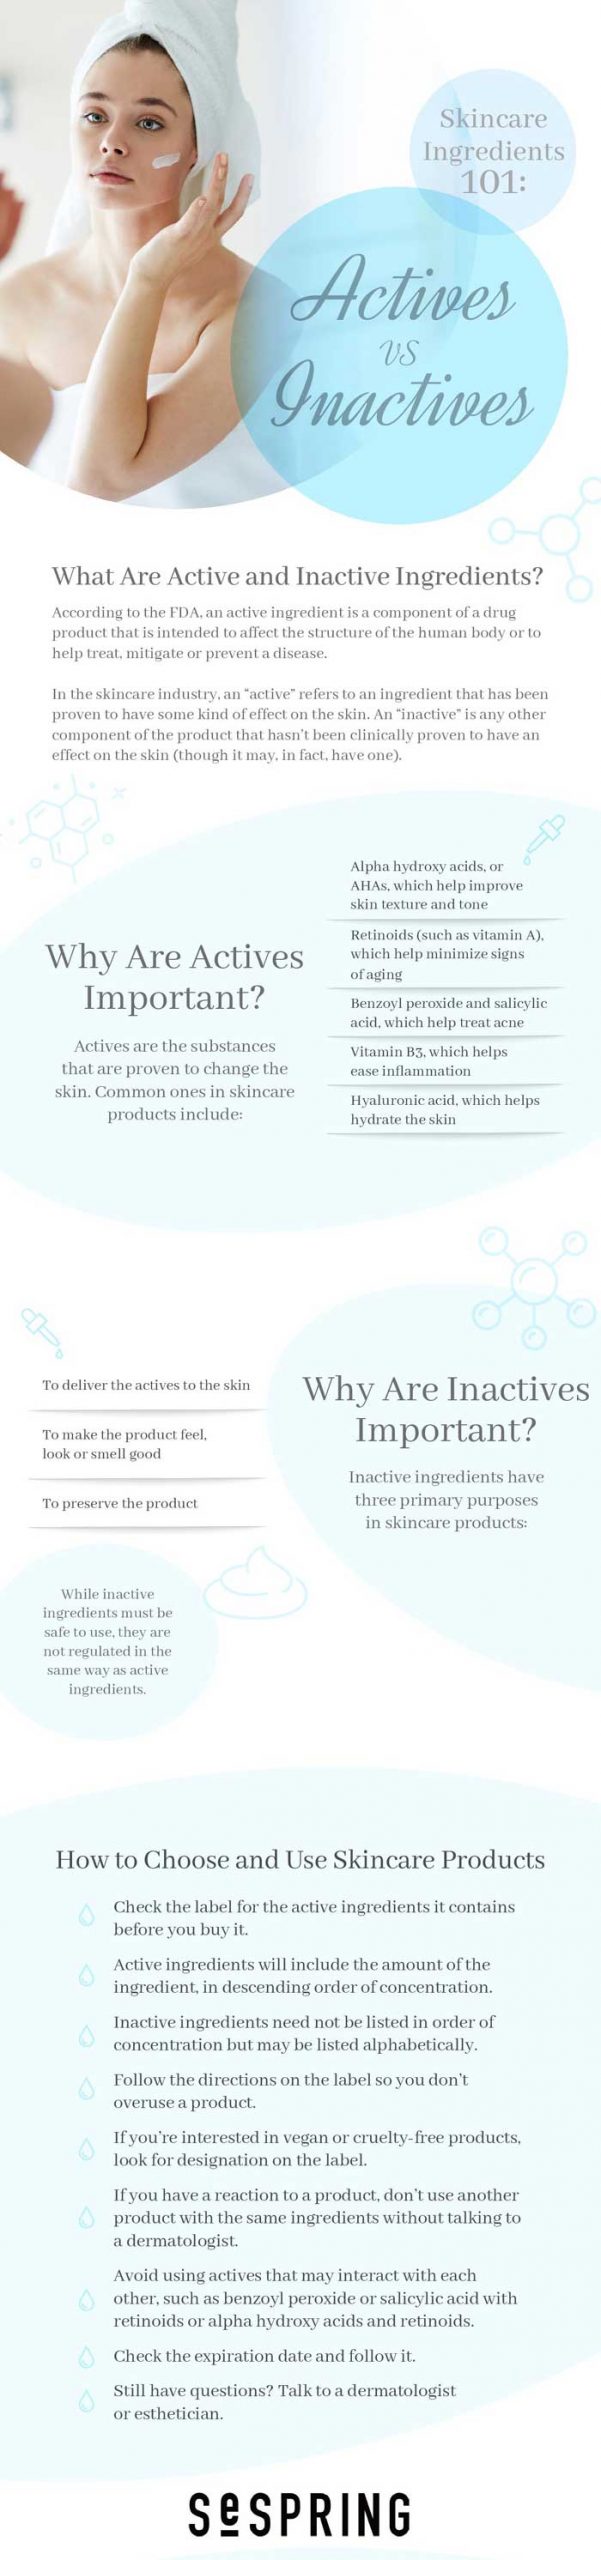 Skincare Ingredients 101 Actives Vs. Inactives